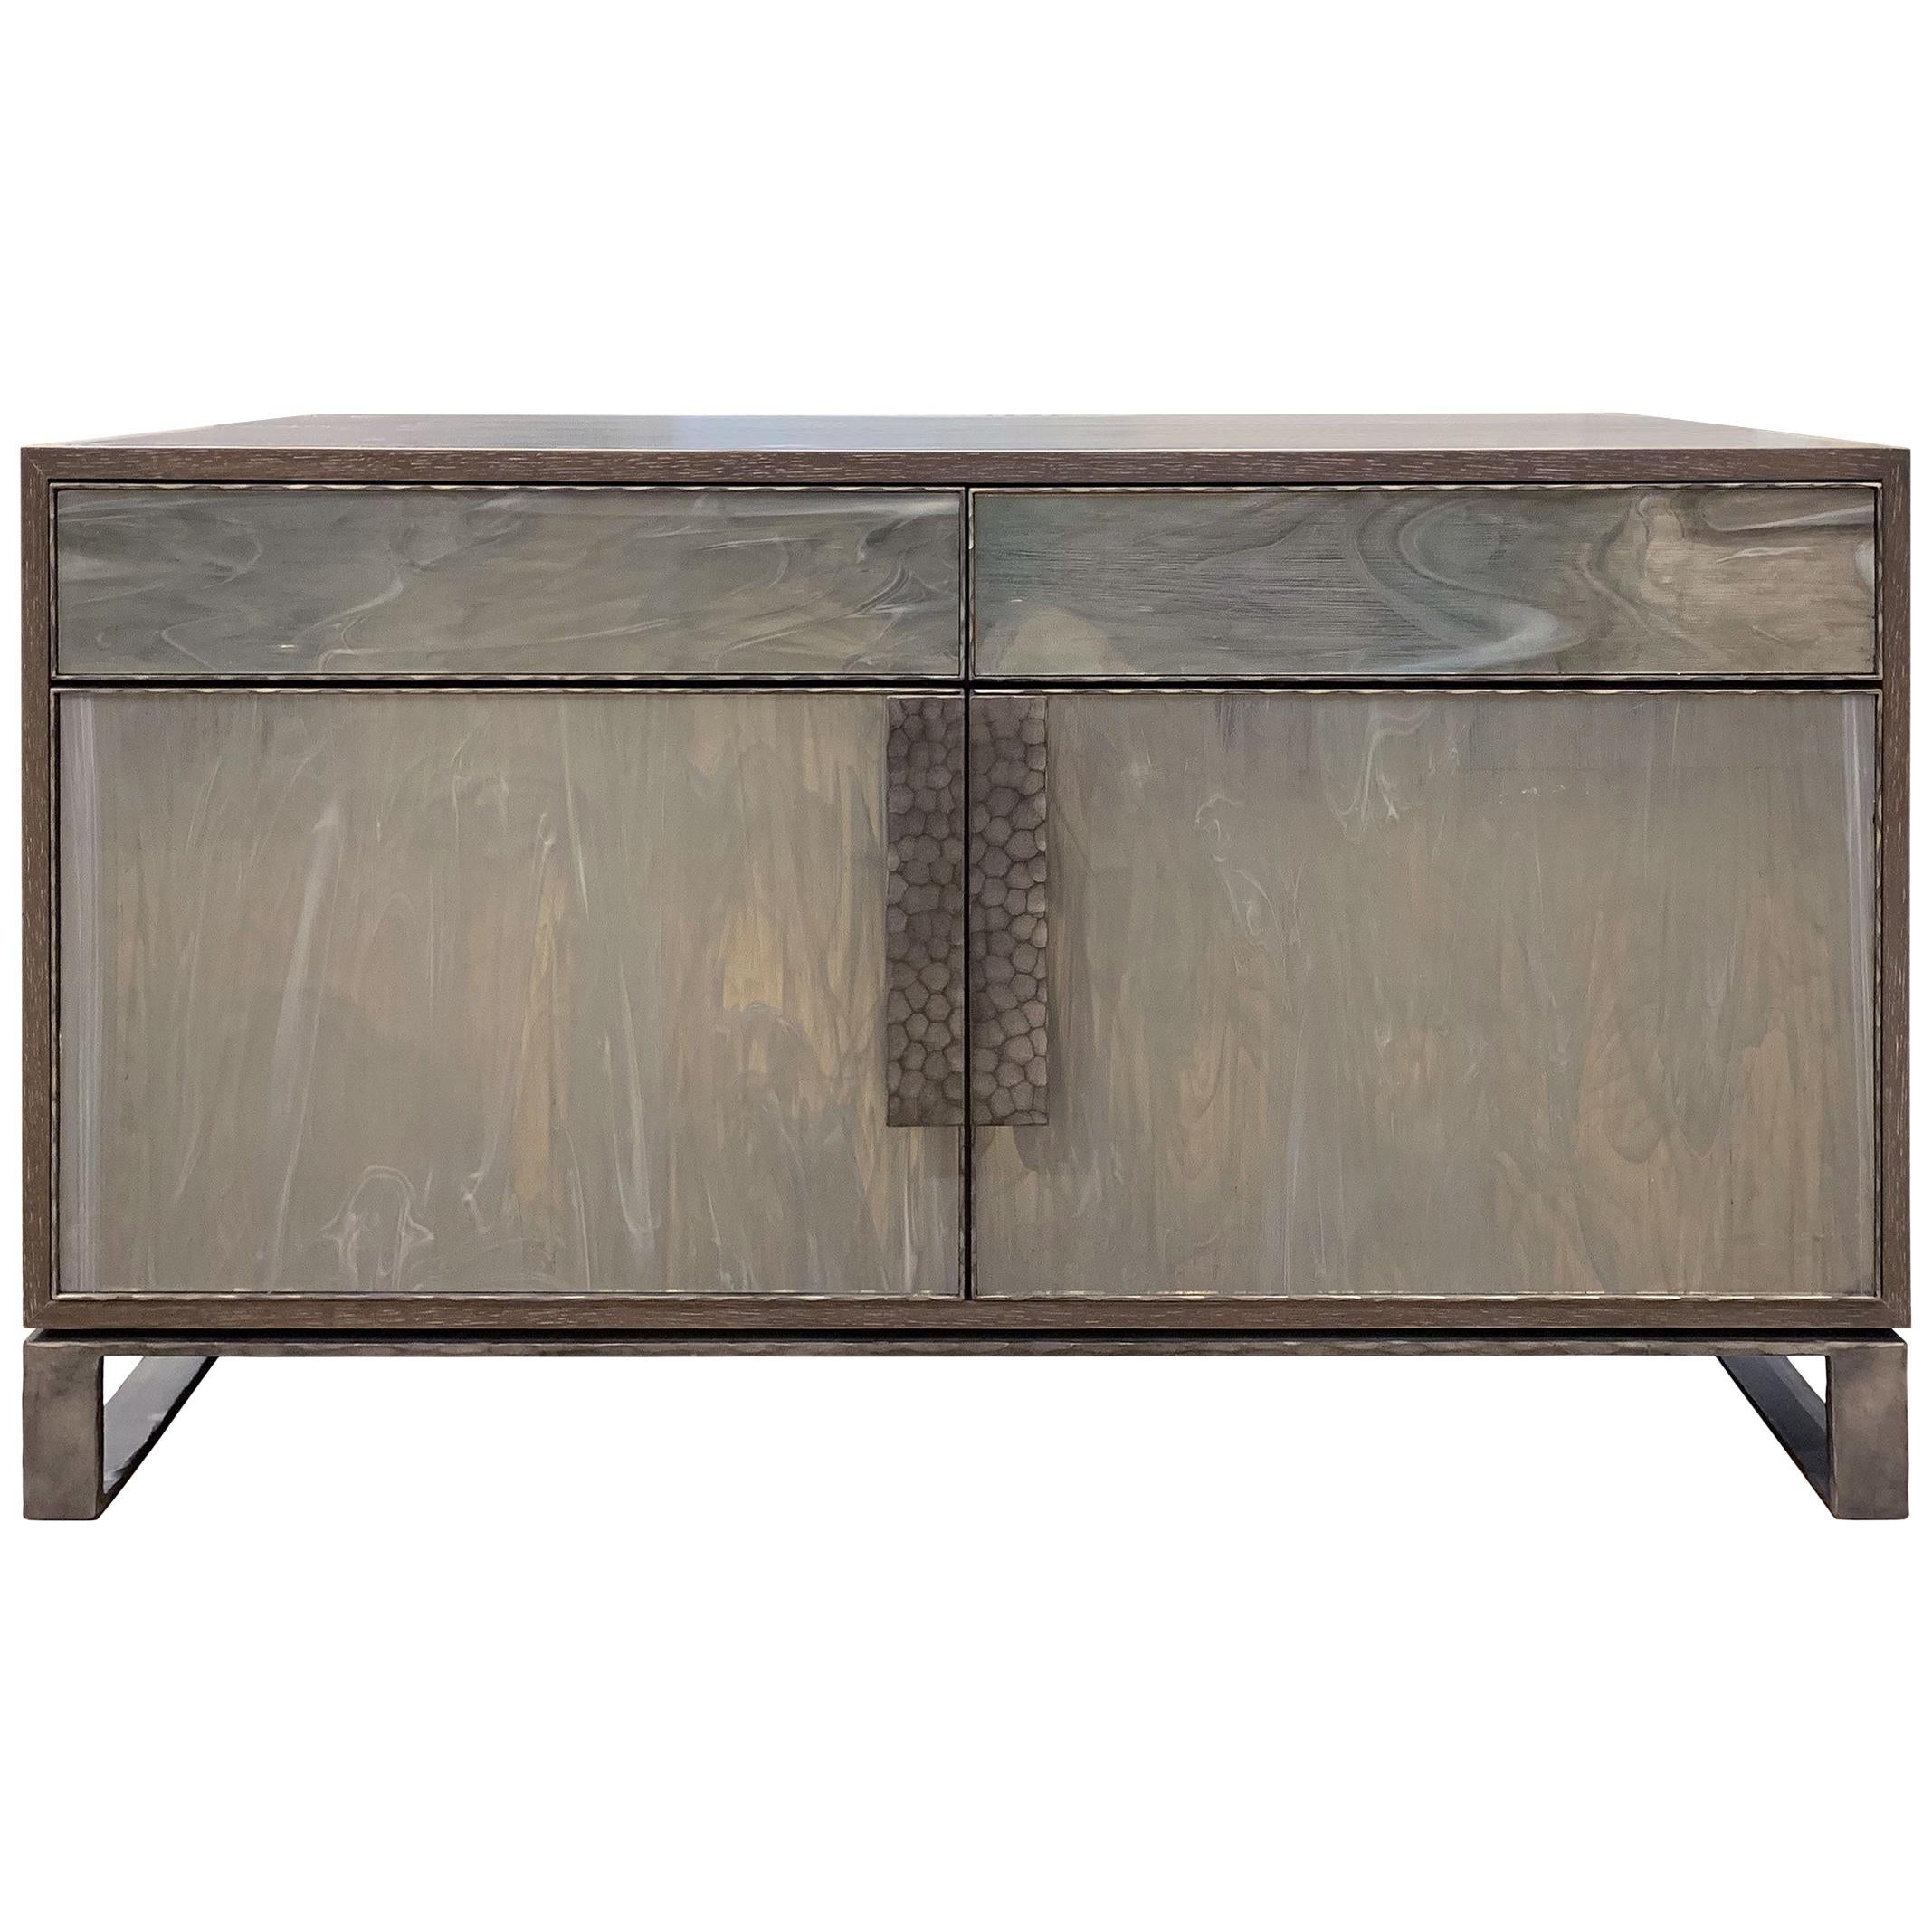 Modern Chelsea 2-Drawer/2-Door Buffet with Forged Metal Handles by Ercole Home